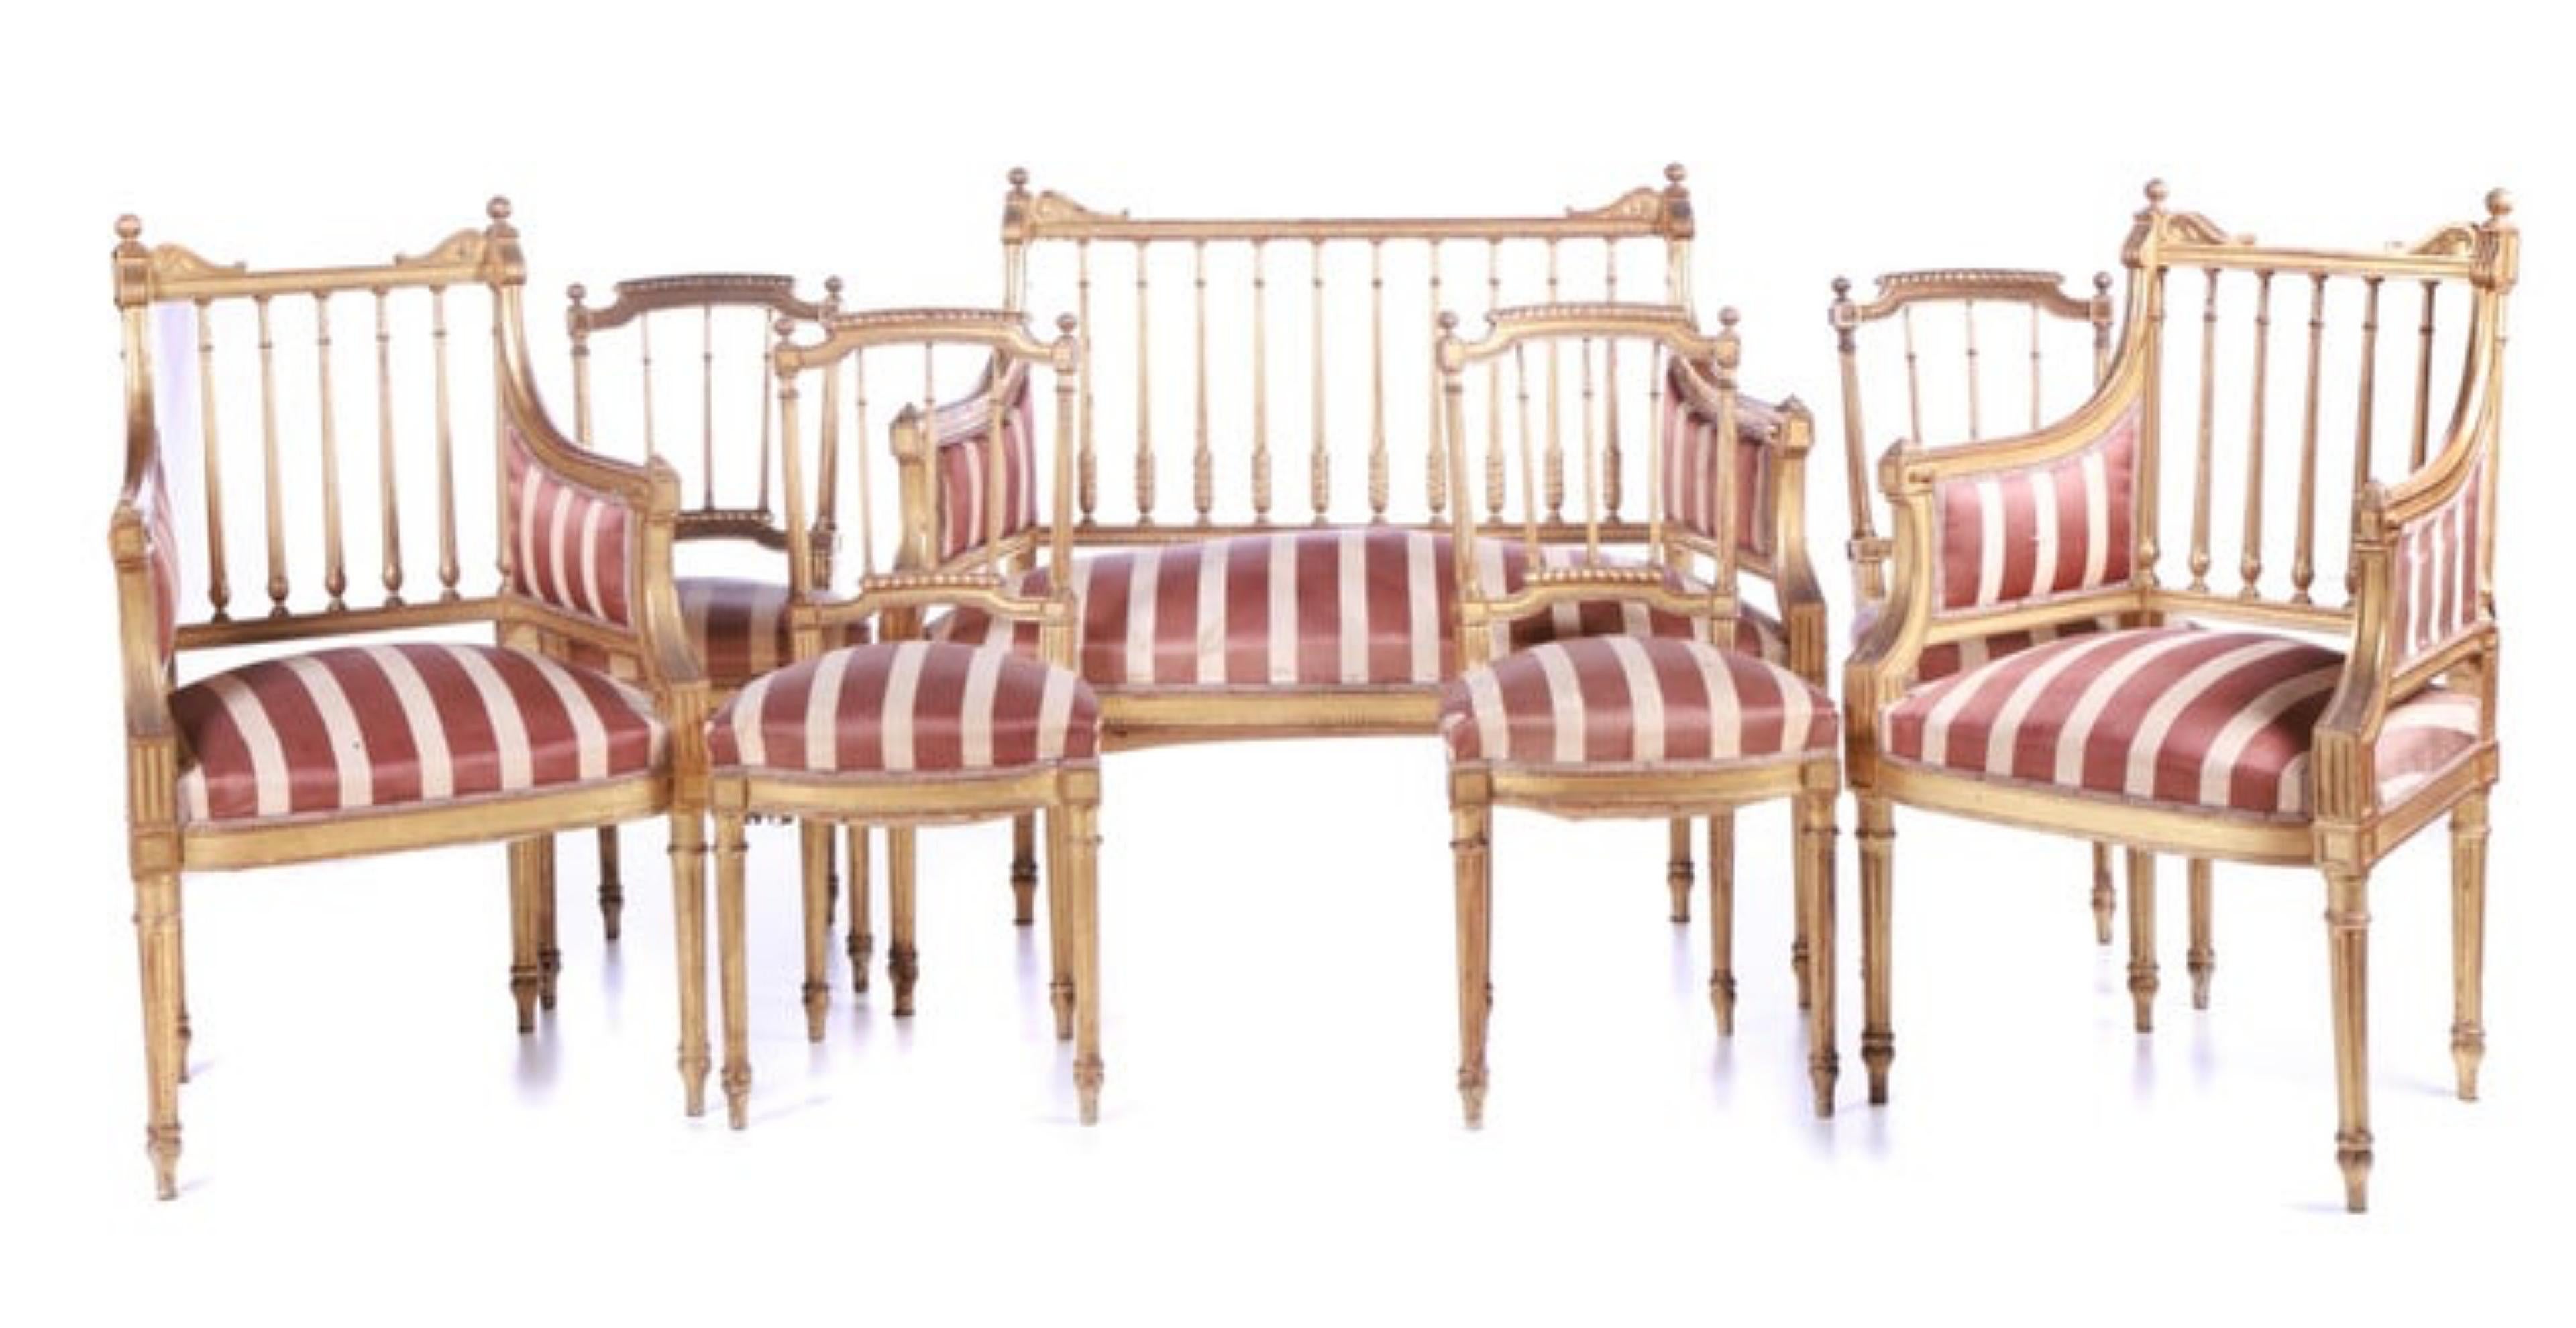 French Canape Set, 4 Chairs and 2 Armchairs Late 19th Century Early 20th Century In Good Condition For Sale In Madrid, ES